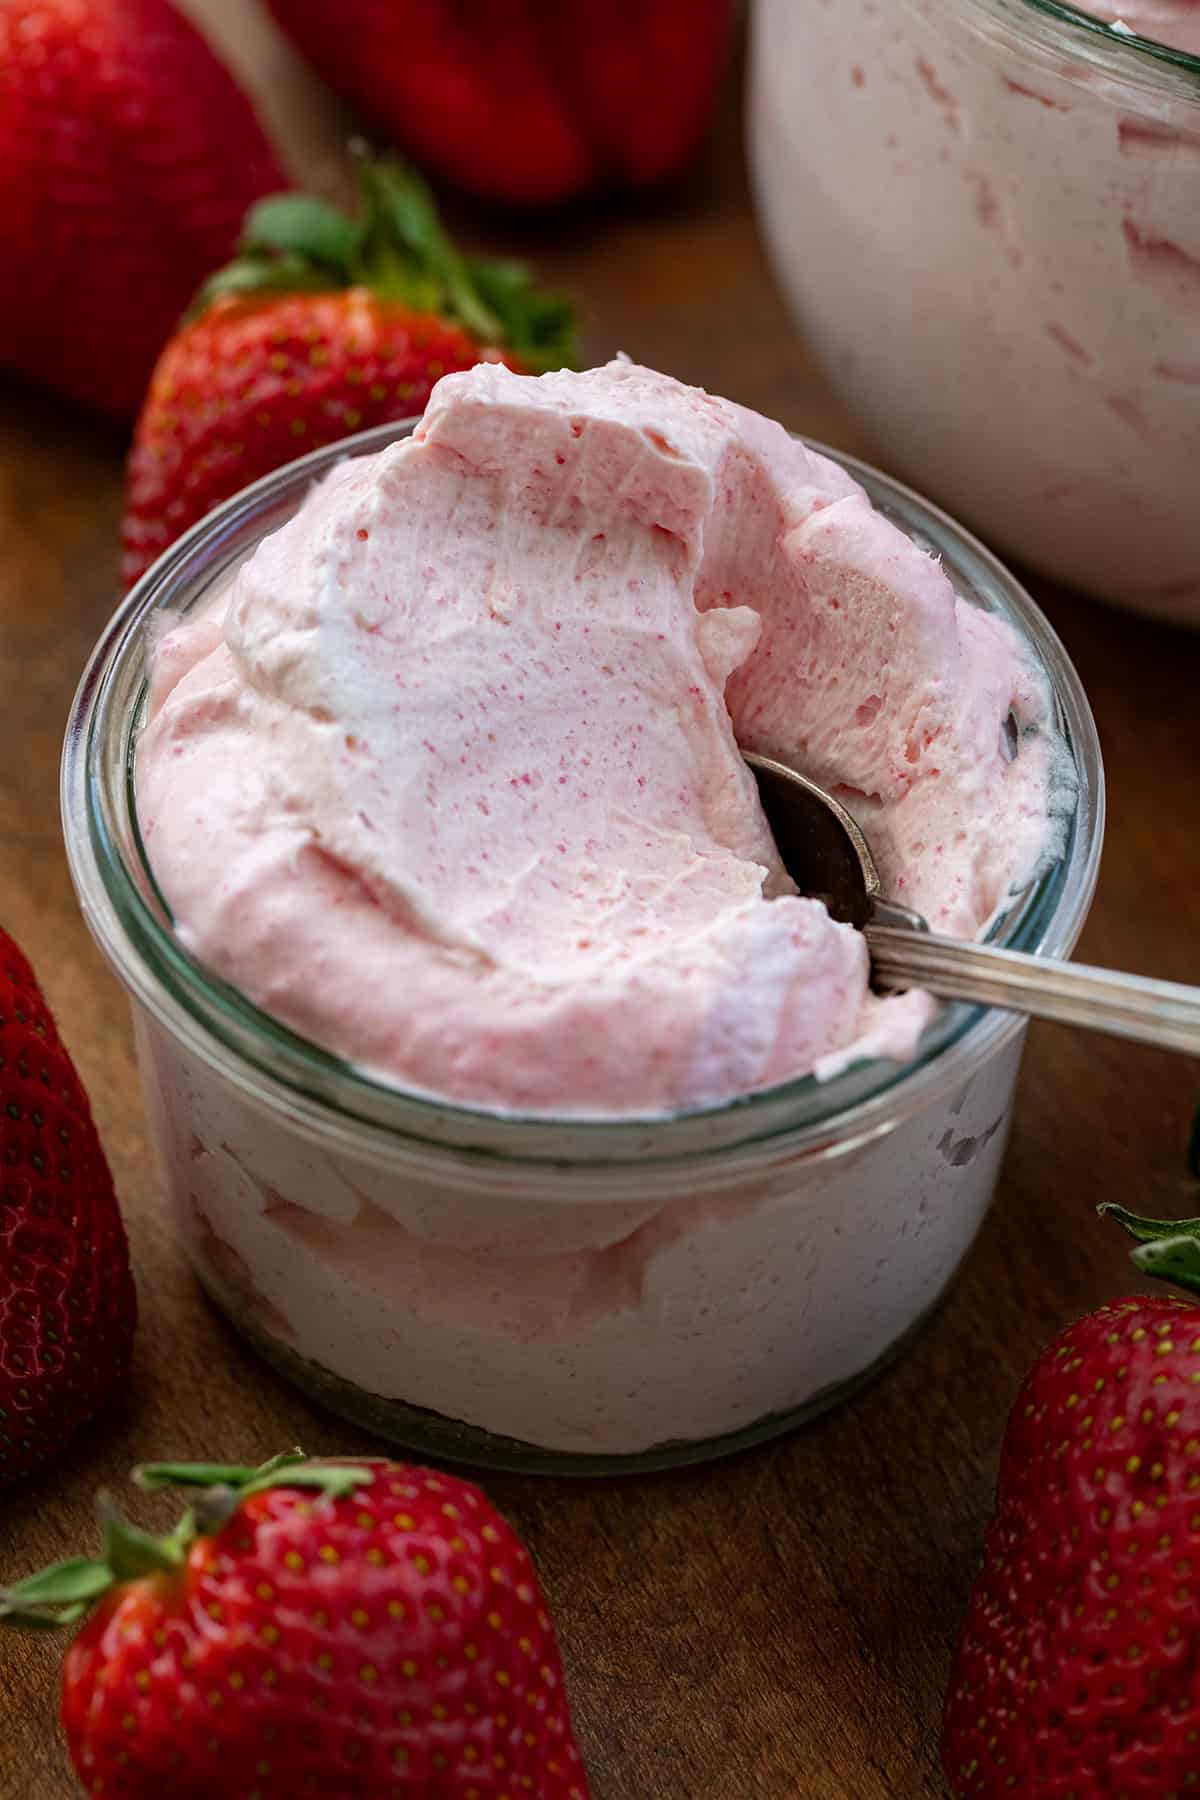 Spoon in a jar of Strawberry Cheesecake Mousse.